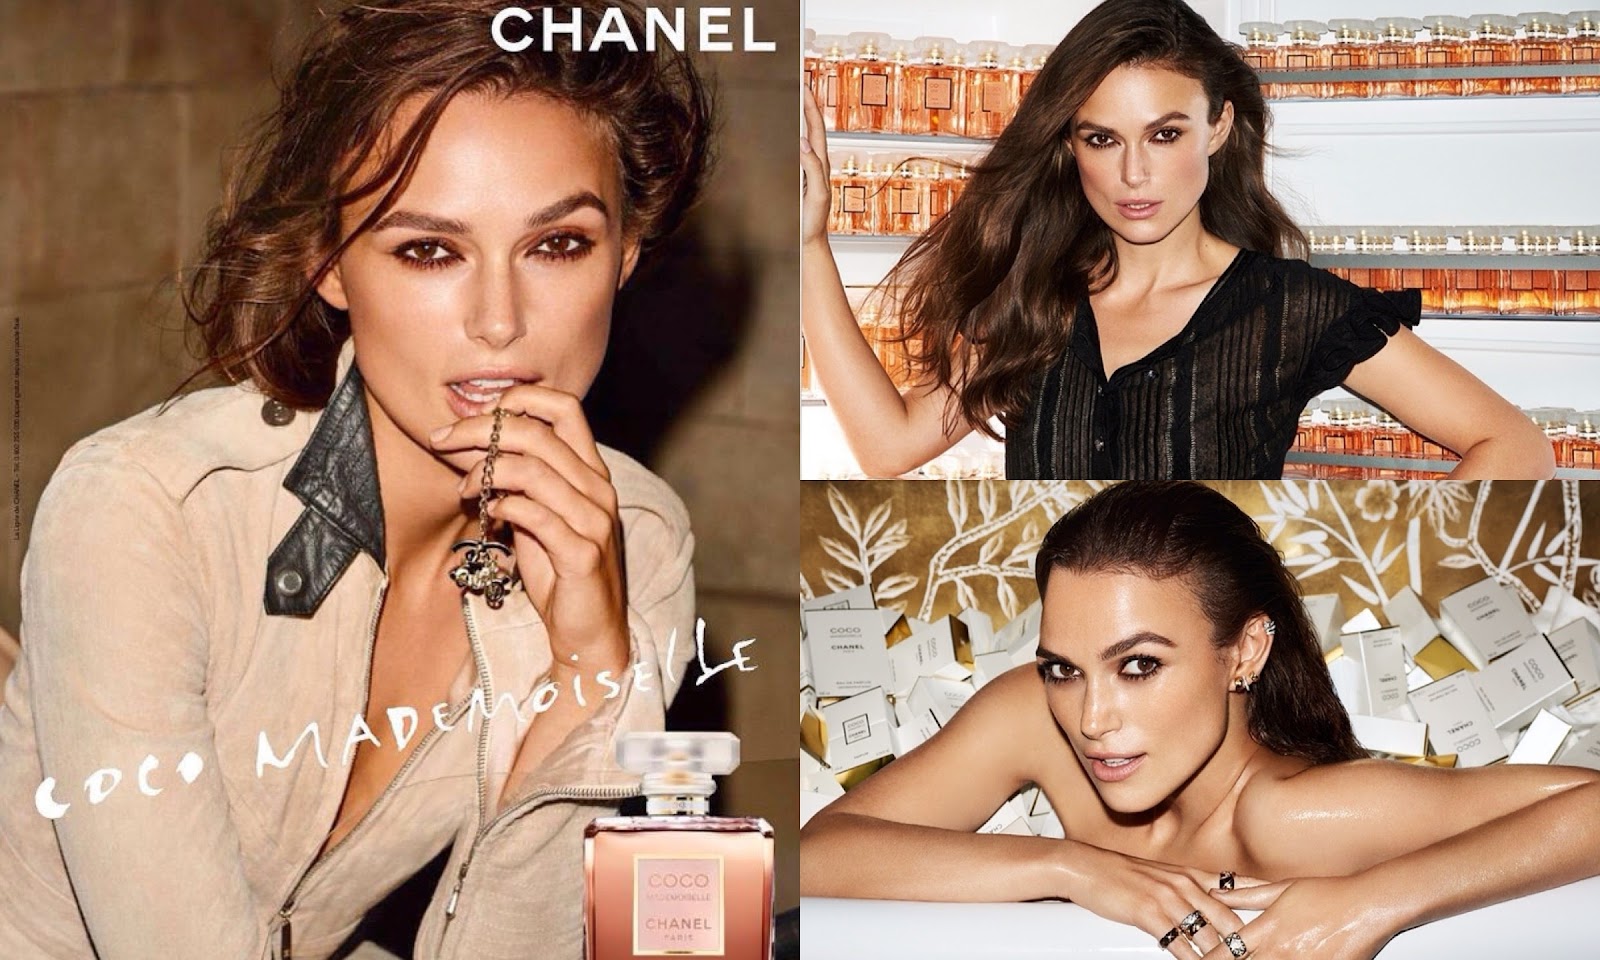 Unleashing the Beauty Within: Keira Knightley's Nude Photoshoot